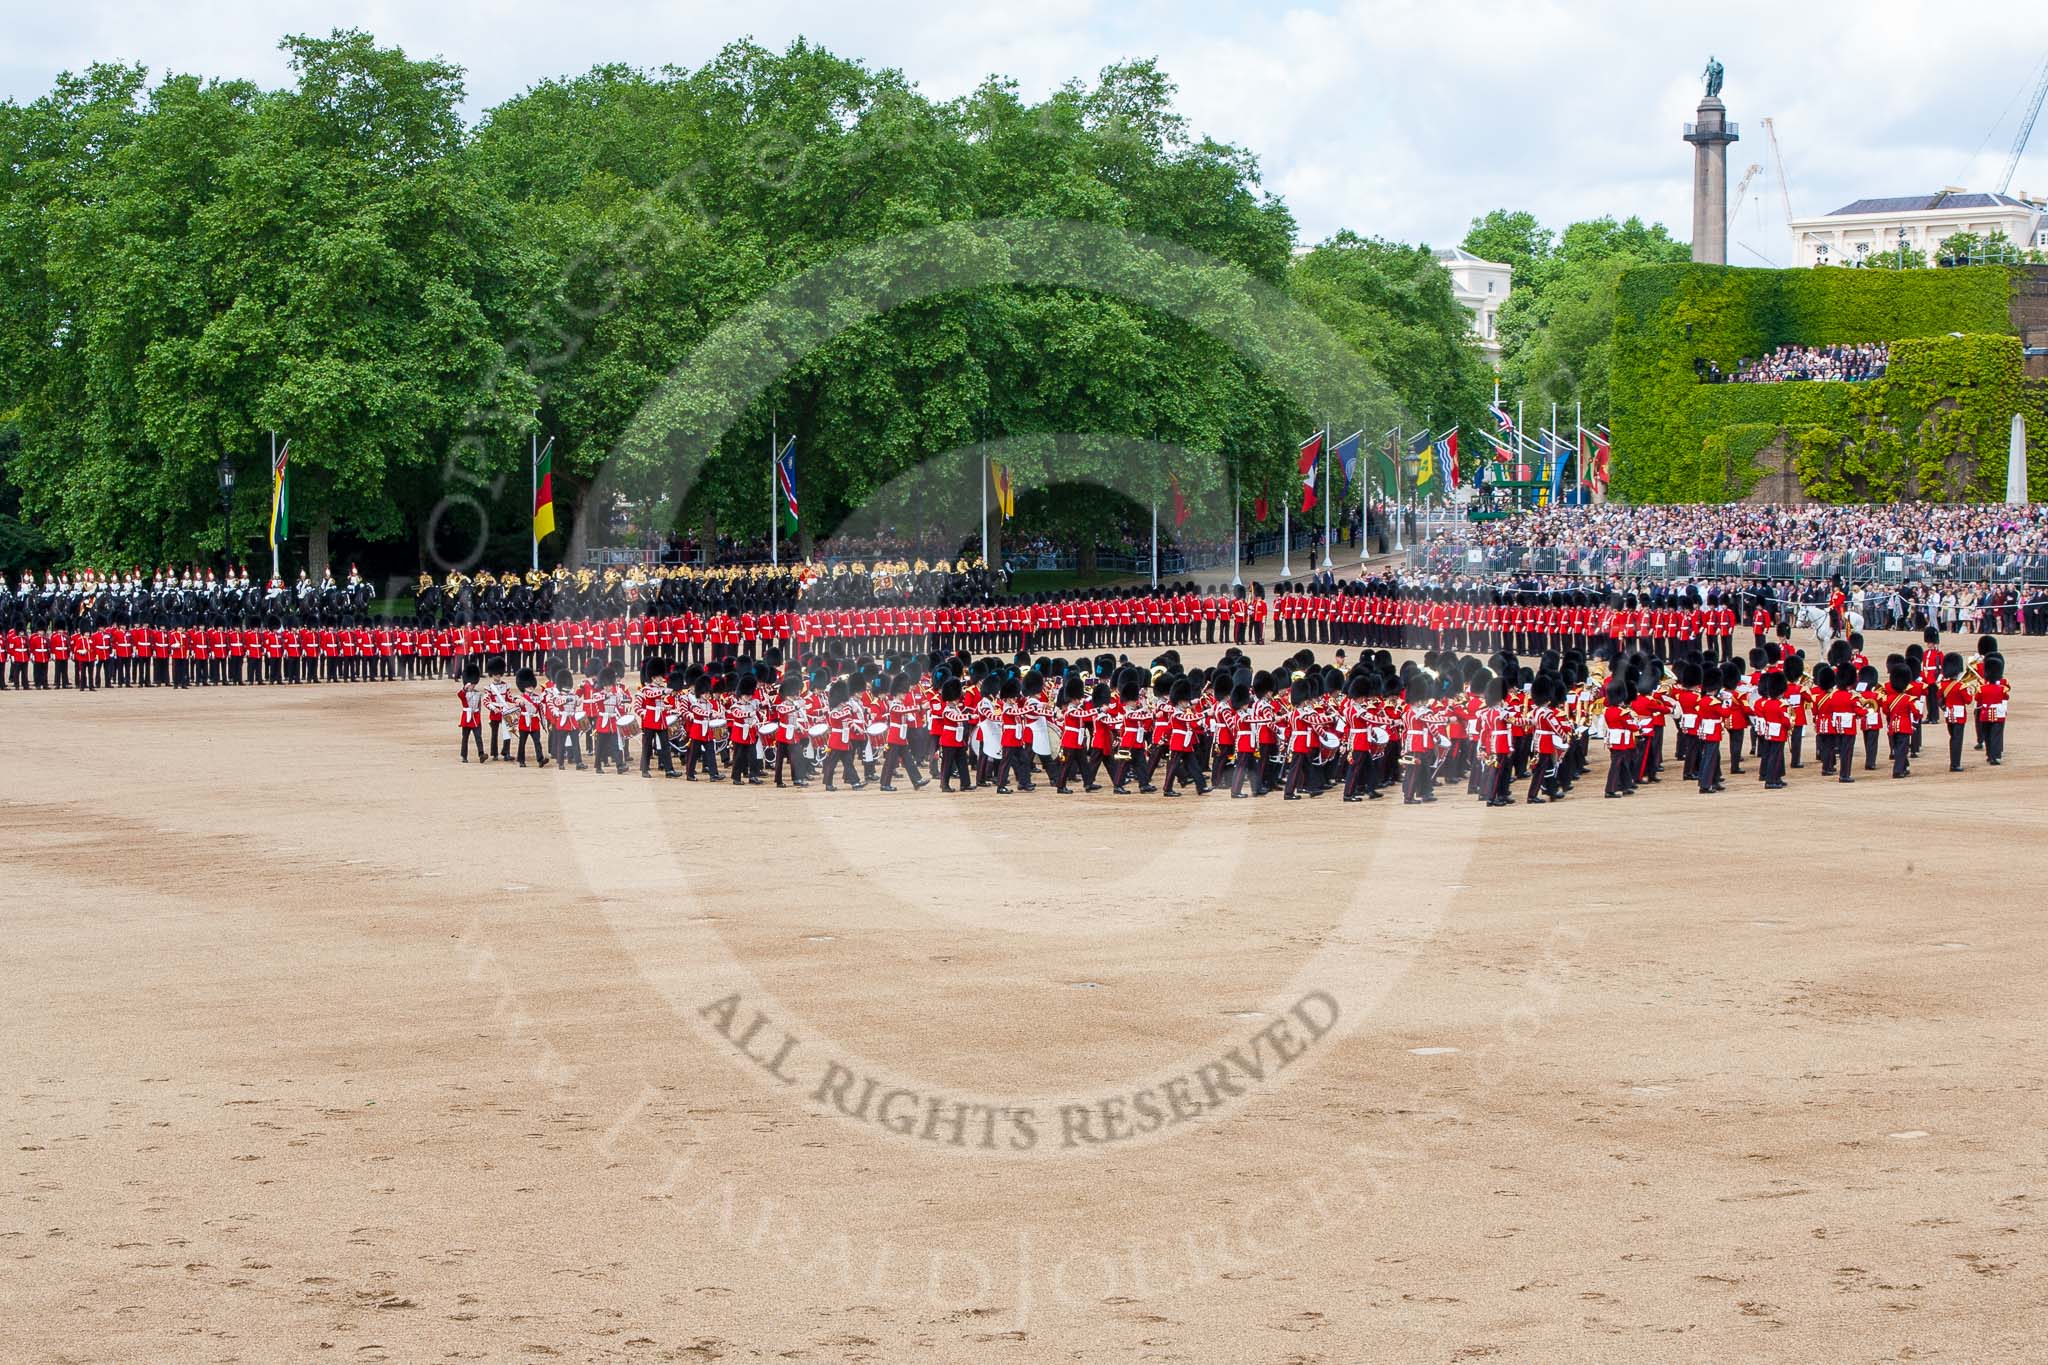 Trooping the Colour 2013: The Massed Bands playing "The British Grenadiers" whilst No. 1 Guard is on the move. Image #437, 15 June 2013 11:17 Horse Guards Parade, London, UK